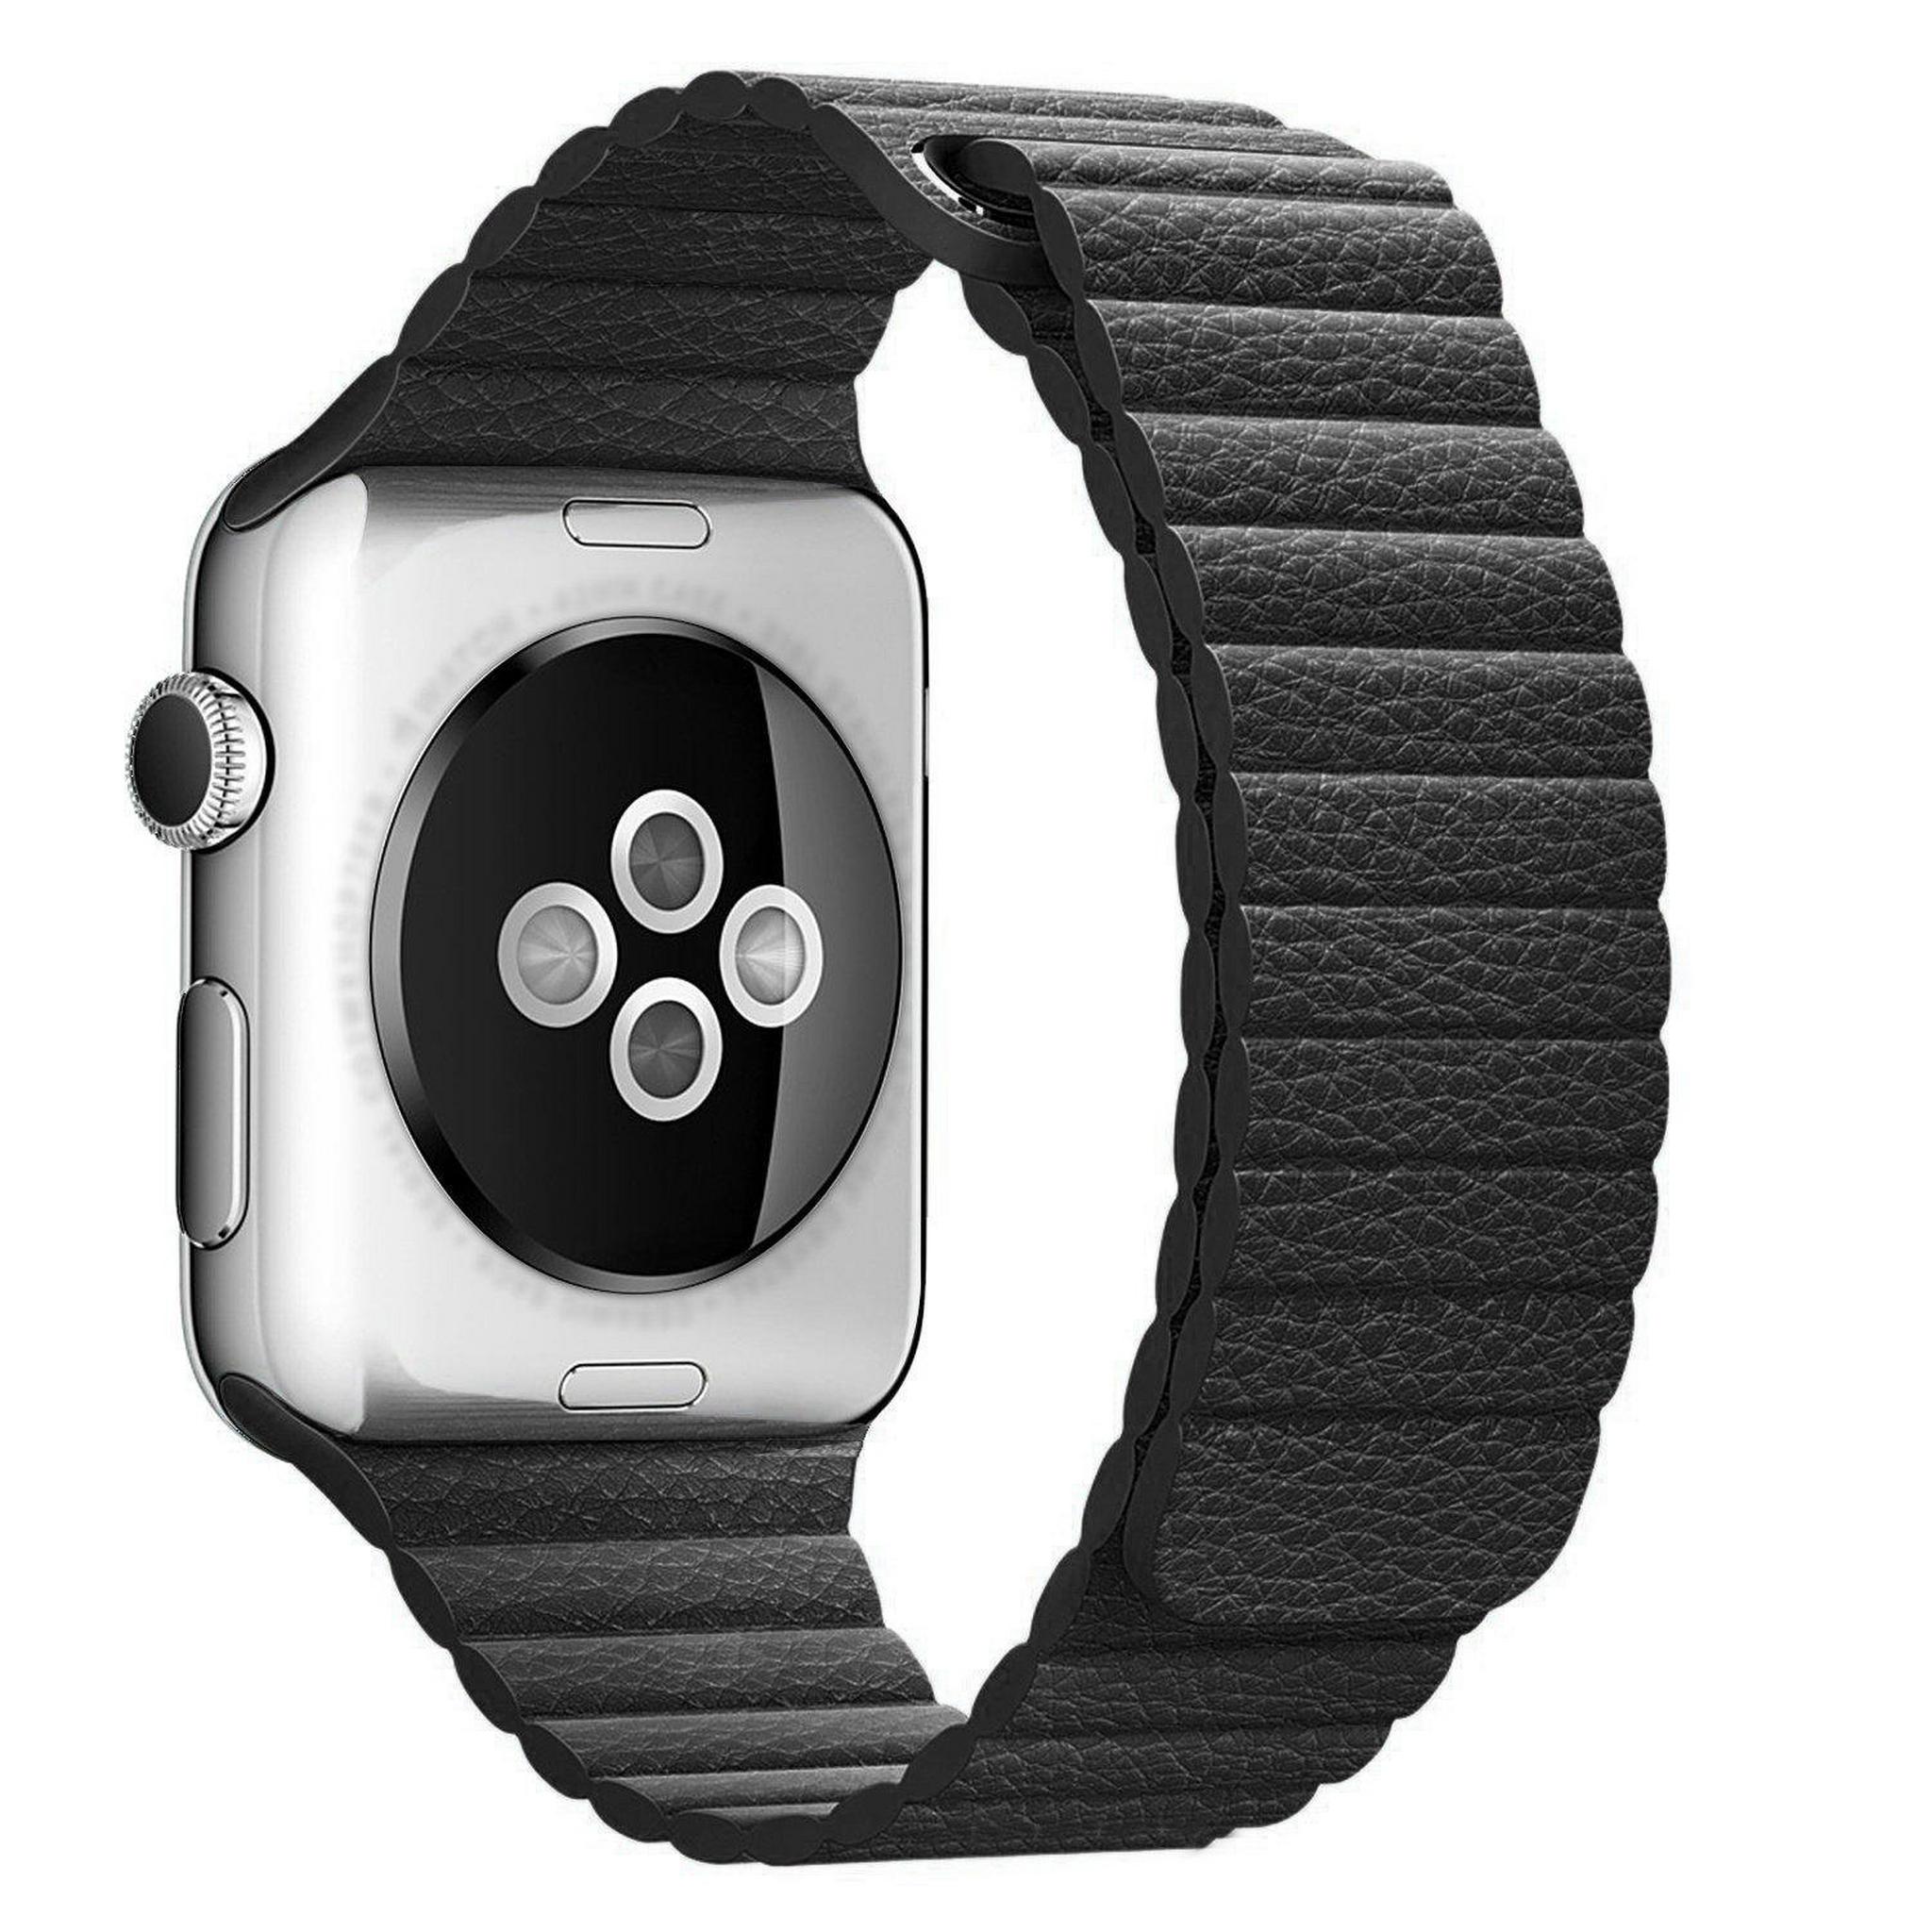 EQ Magnetic Leather Strap For Apple Watch 45mm - Black